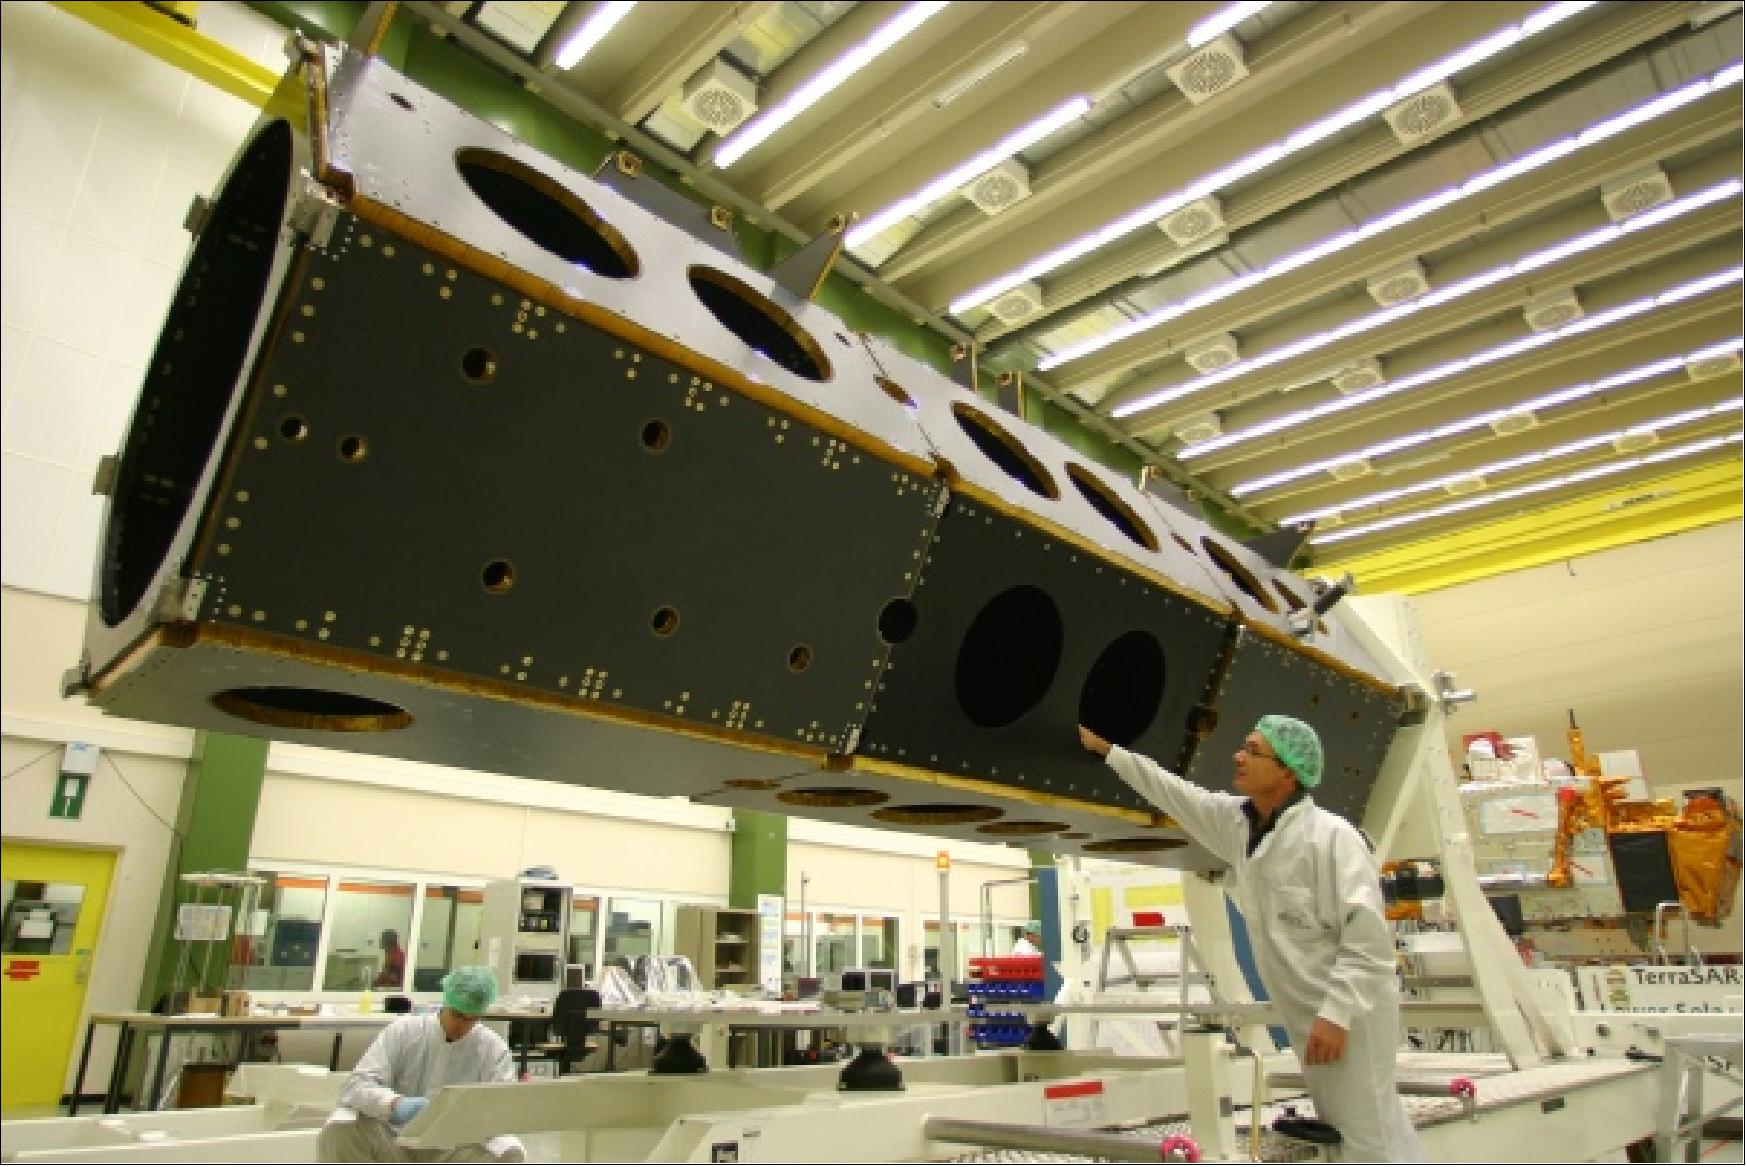 Figure 8: The TerraSAR-X spacecraft bus in the manufacturing process at EADS Astrium (image credit: EADS Astrium)